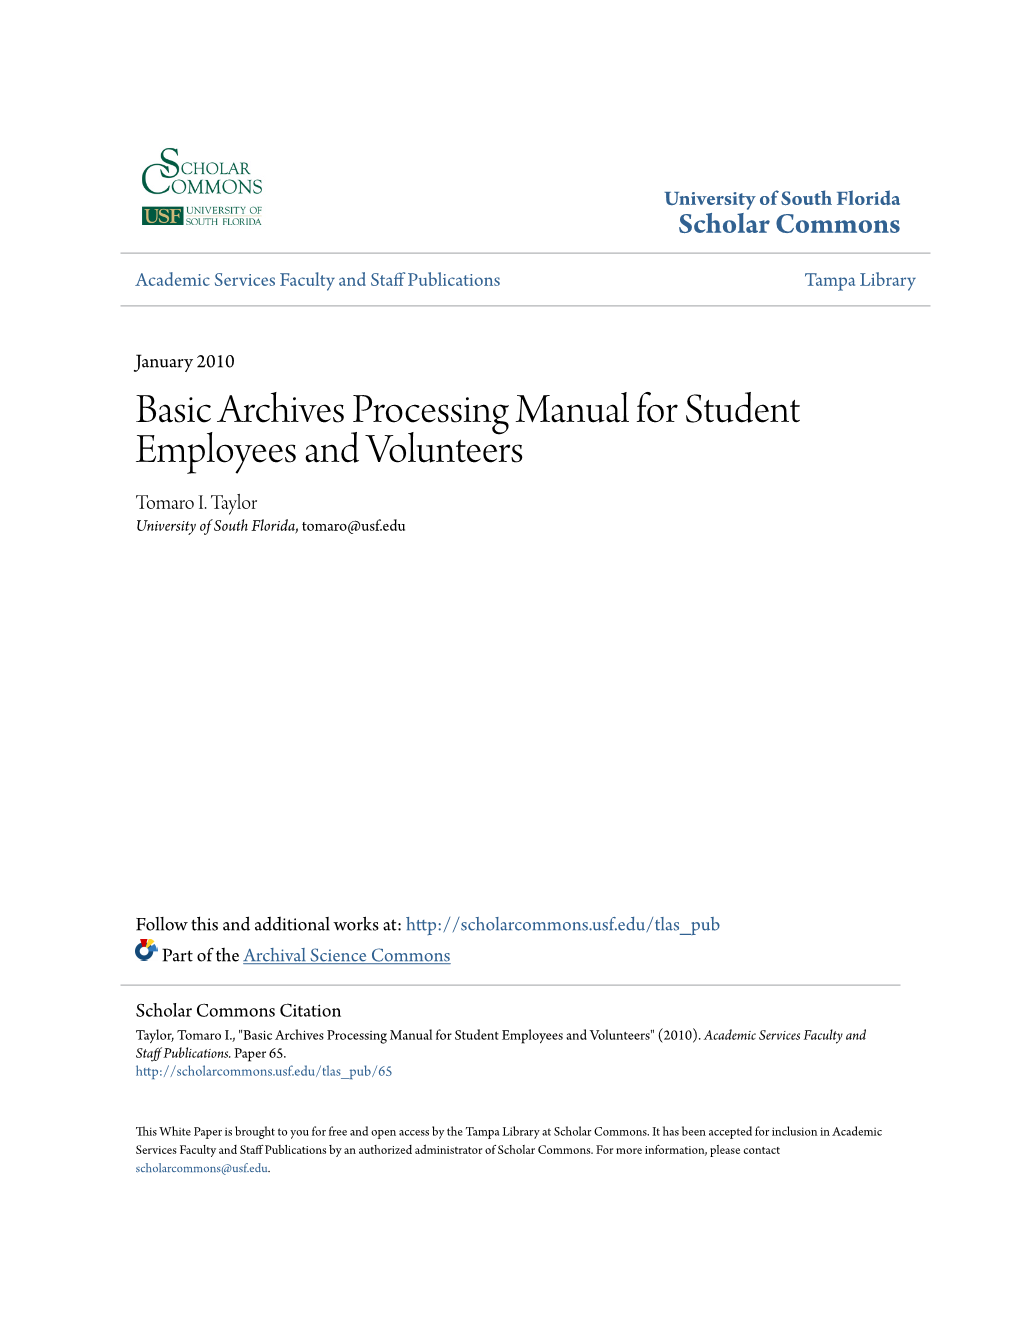 Basic Archives Processing Manual for Student Employees and Volunteers Tomaro I